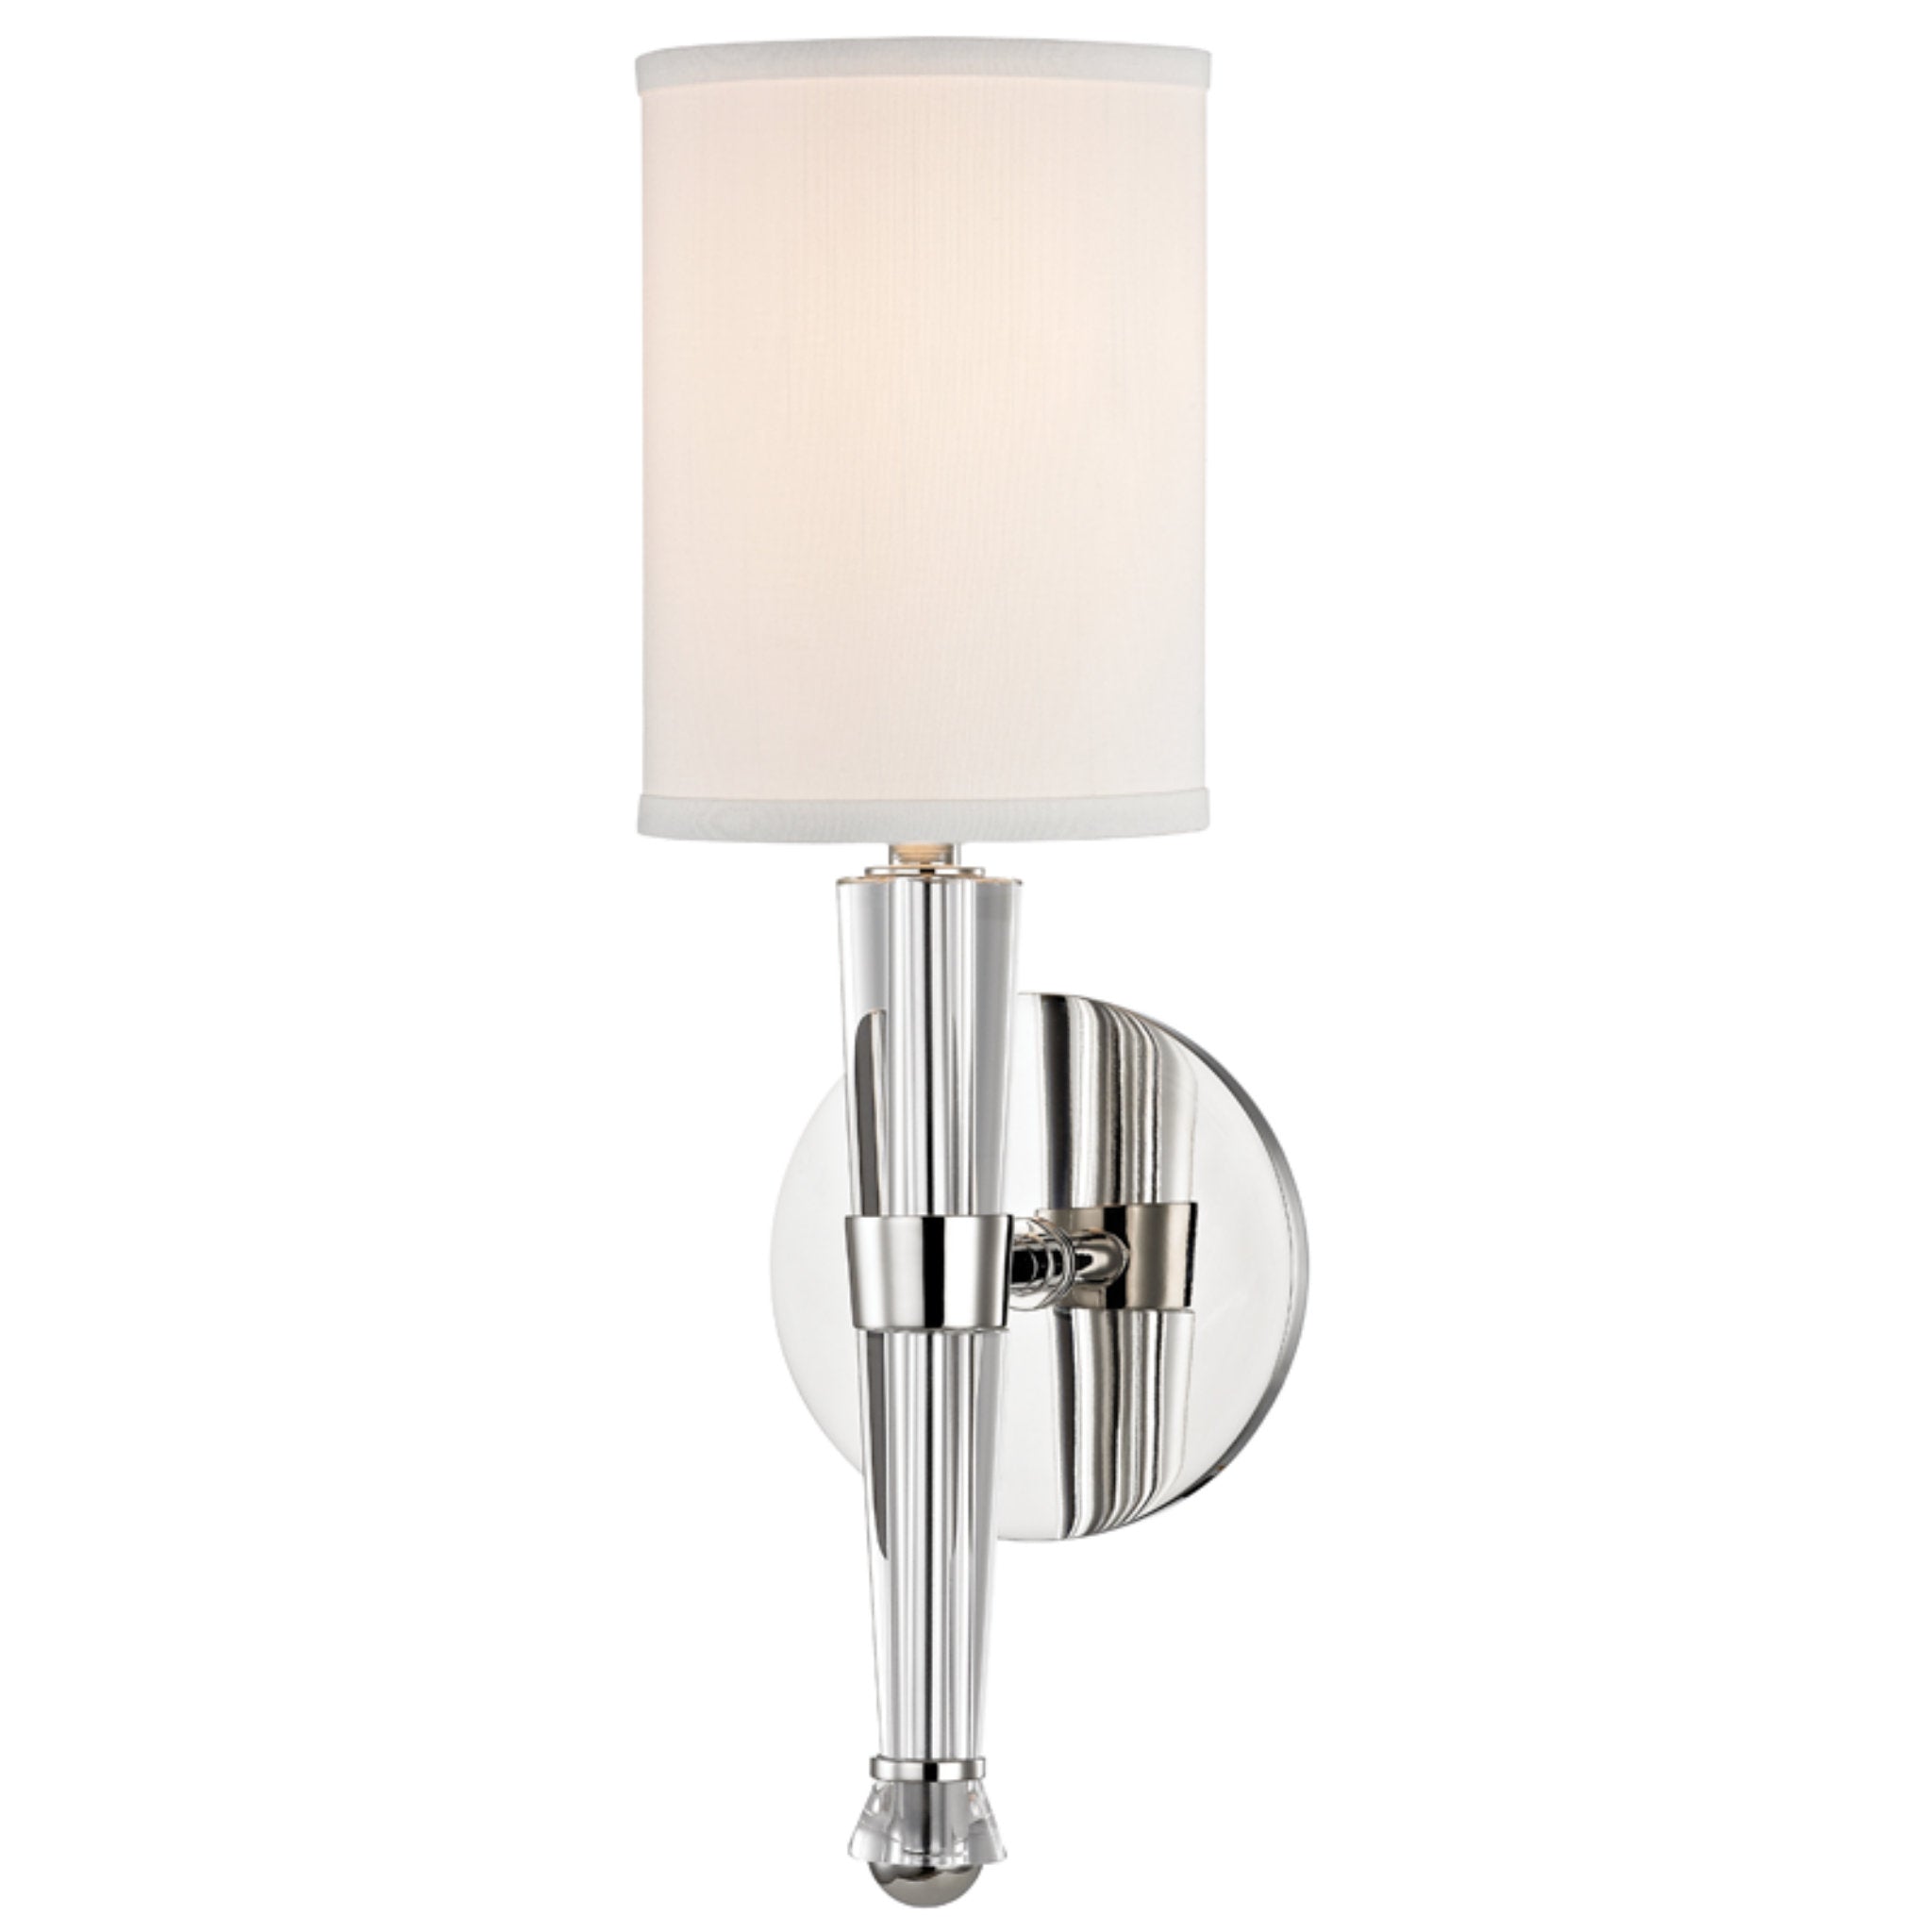 Volta 1 Light Wall Sconce in Polished Nickel